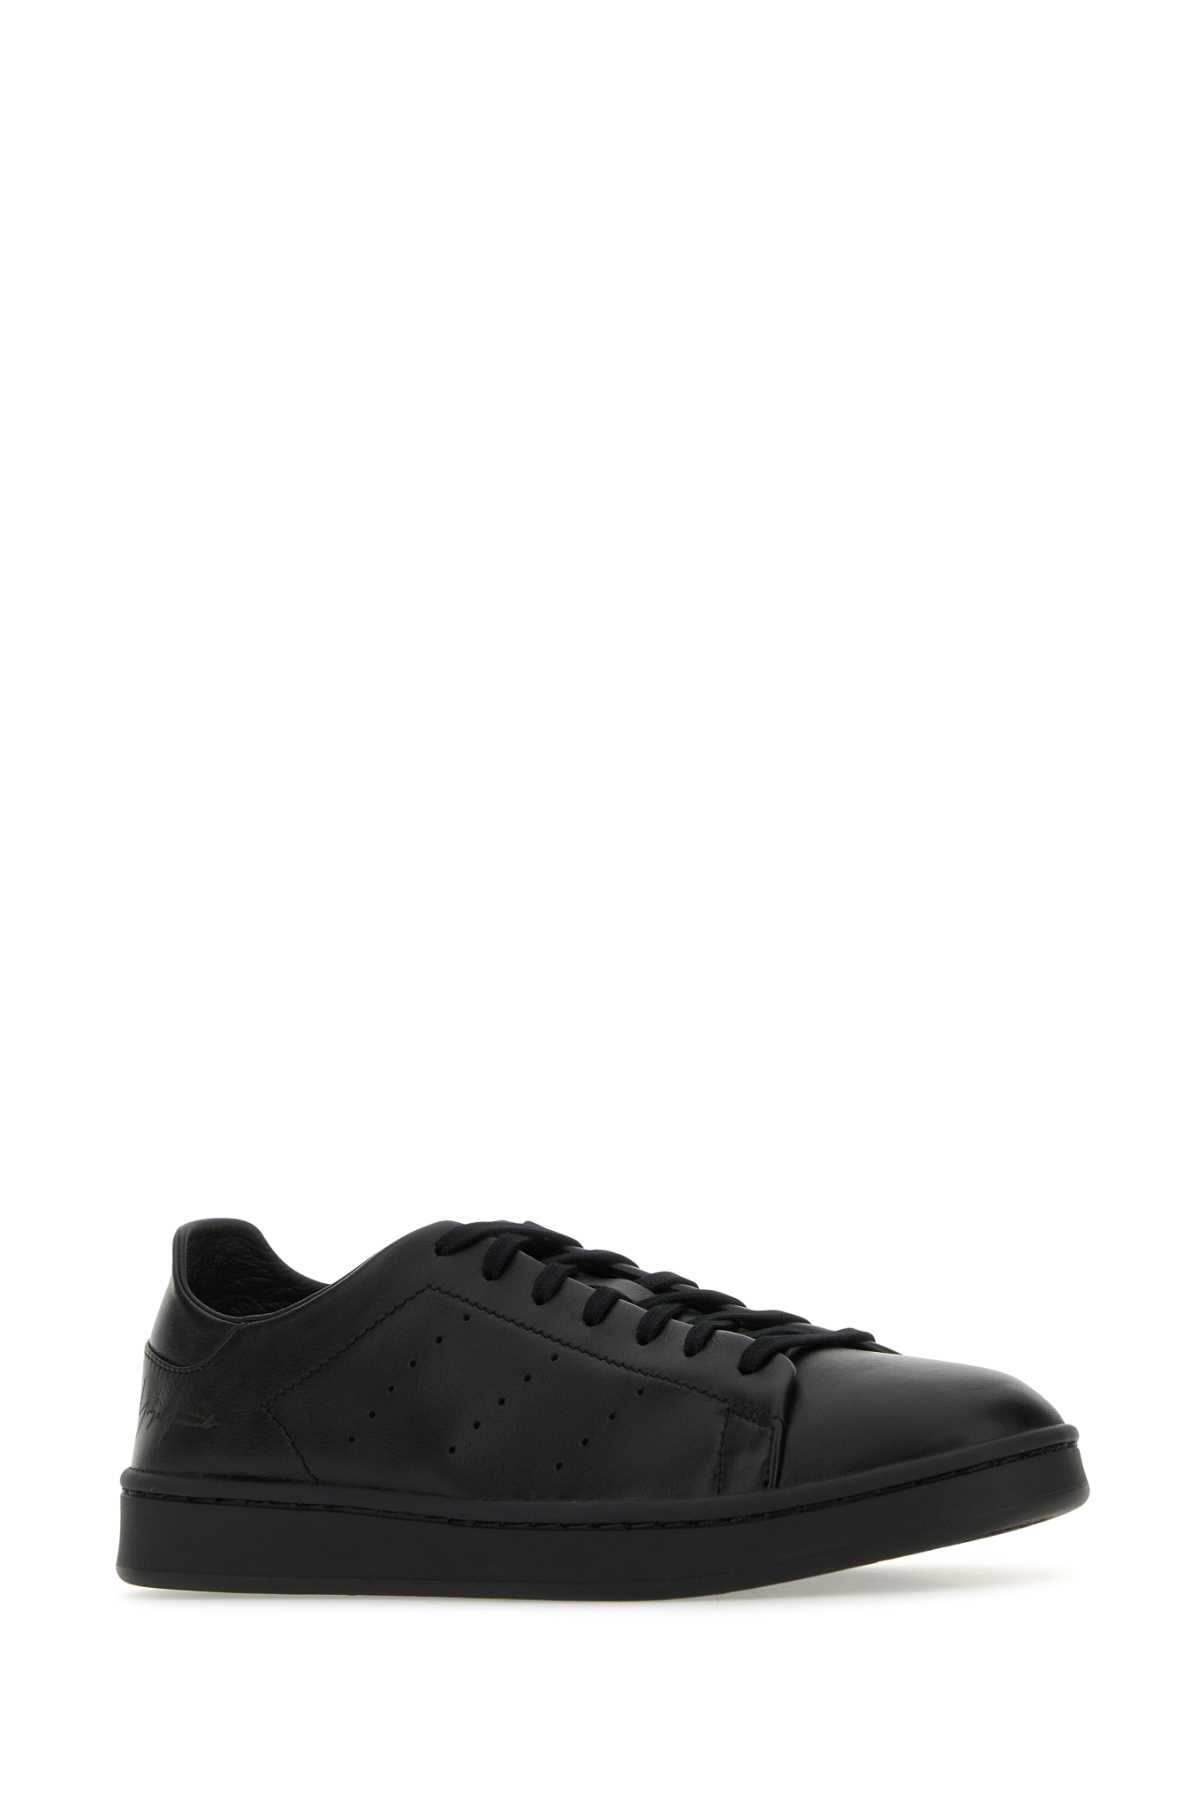 Y-3 Black Leather Stan Smith Sneakers